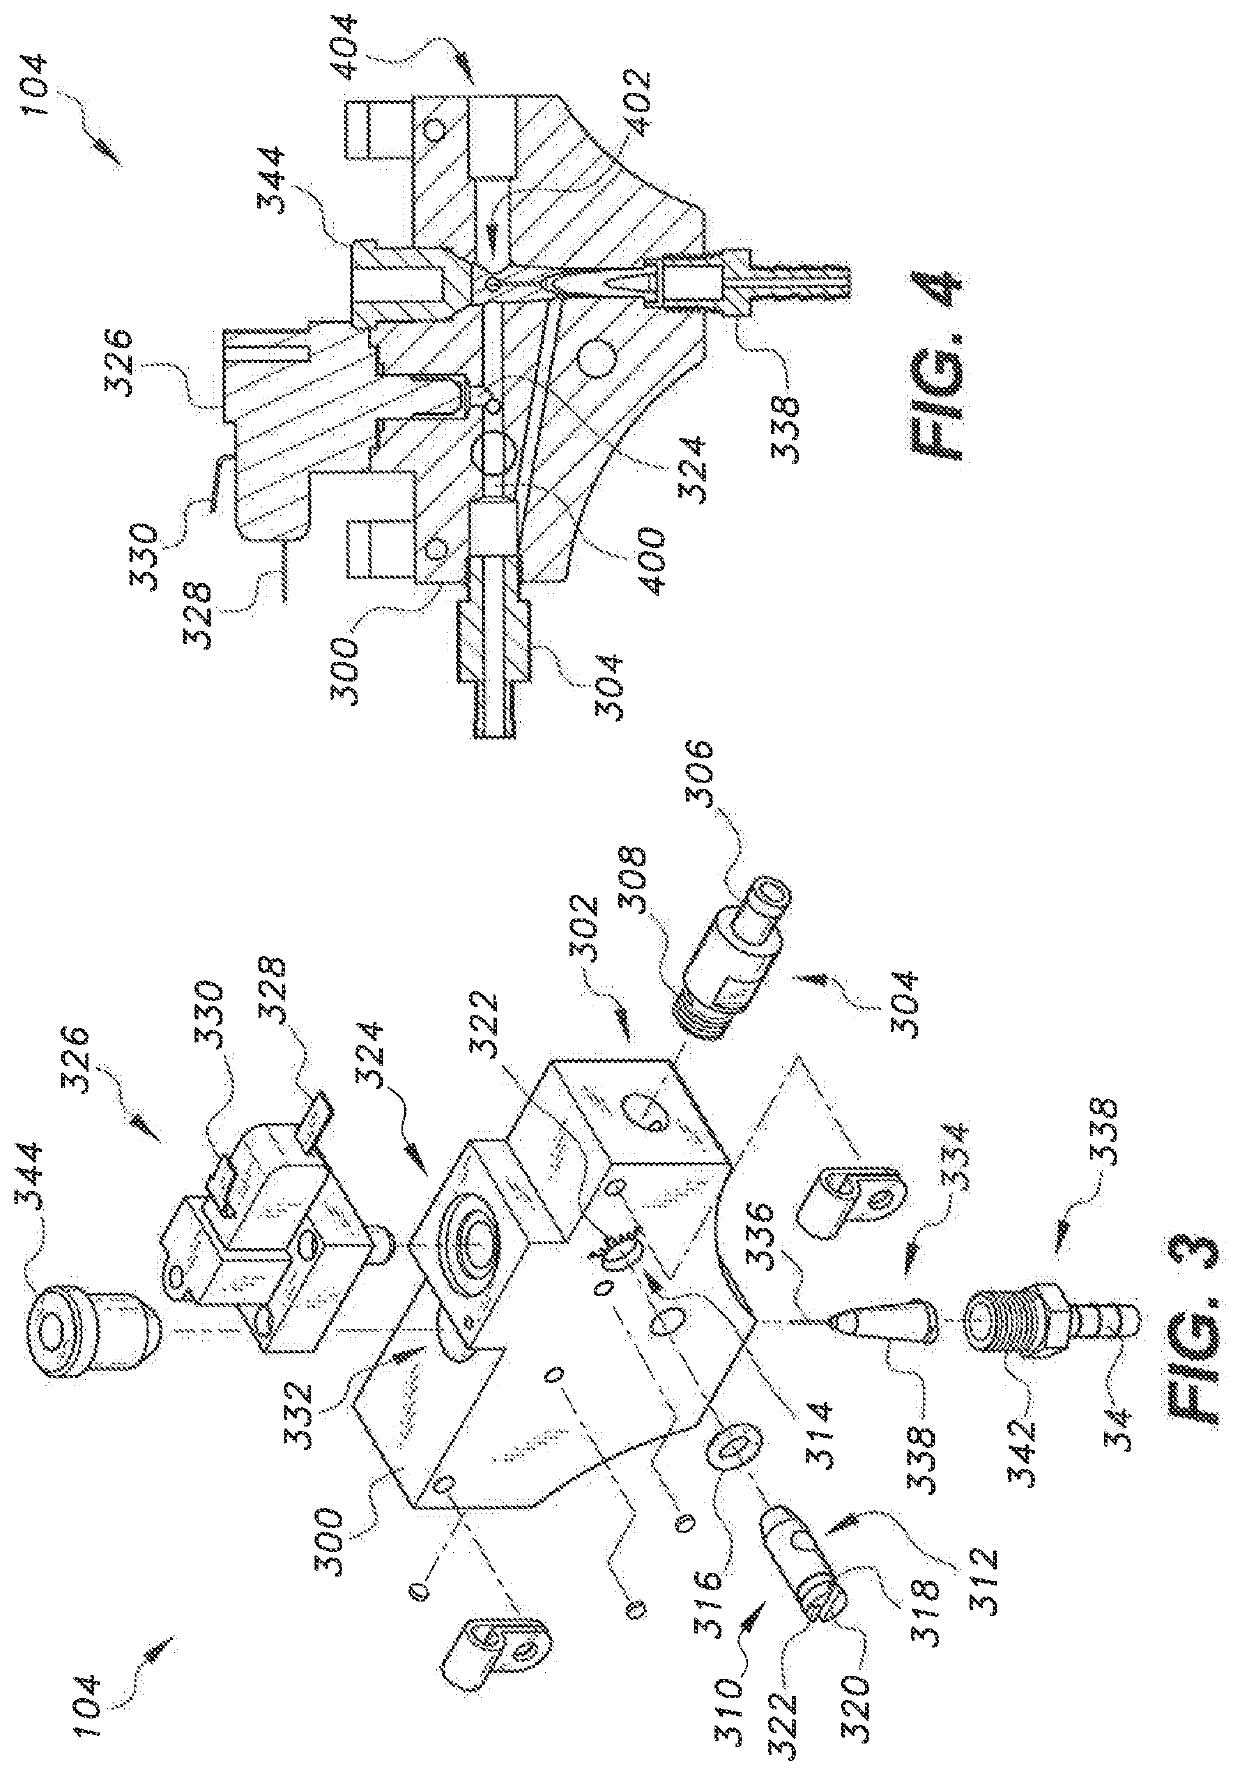 Hydrogen production system for internal combustion engines